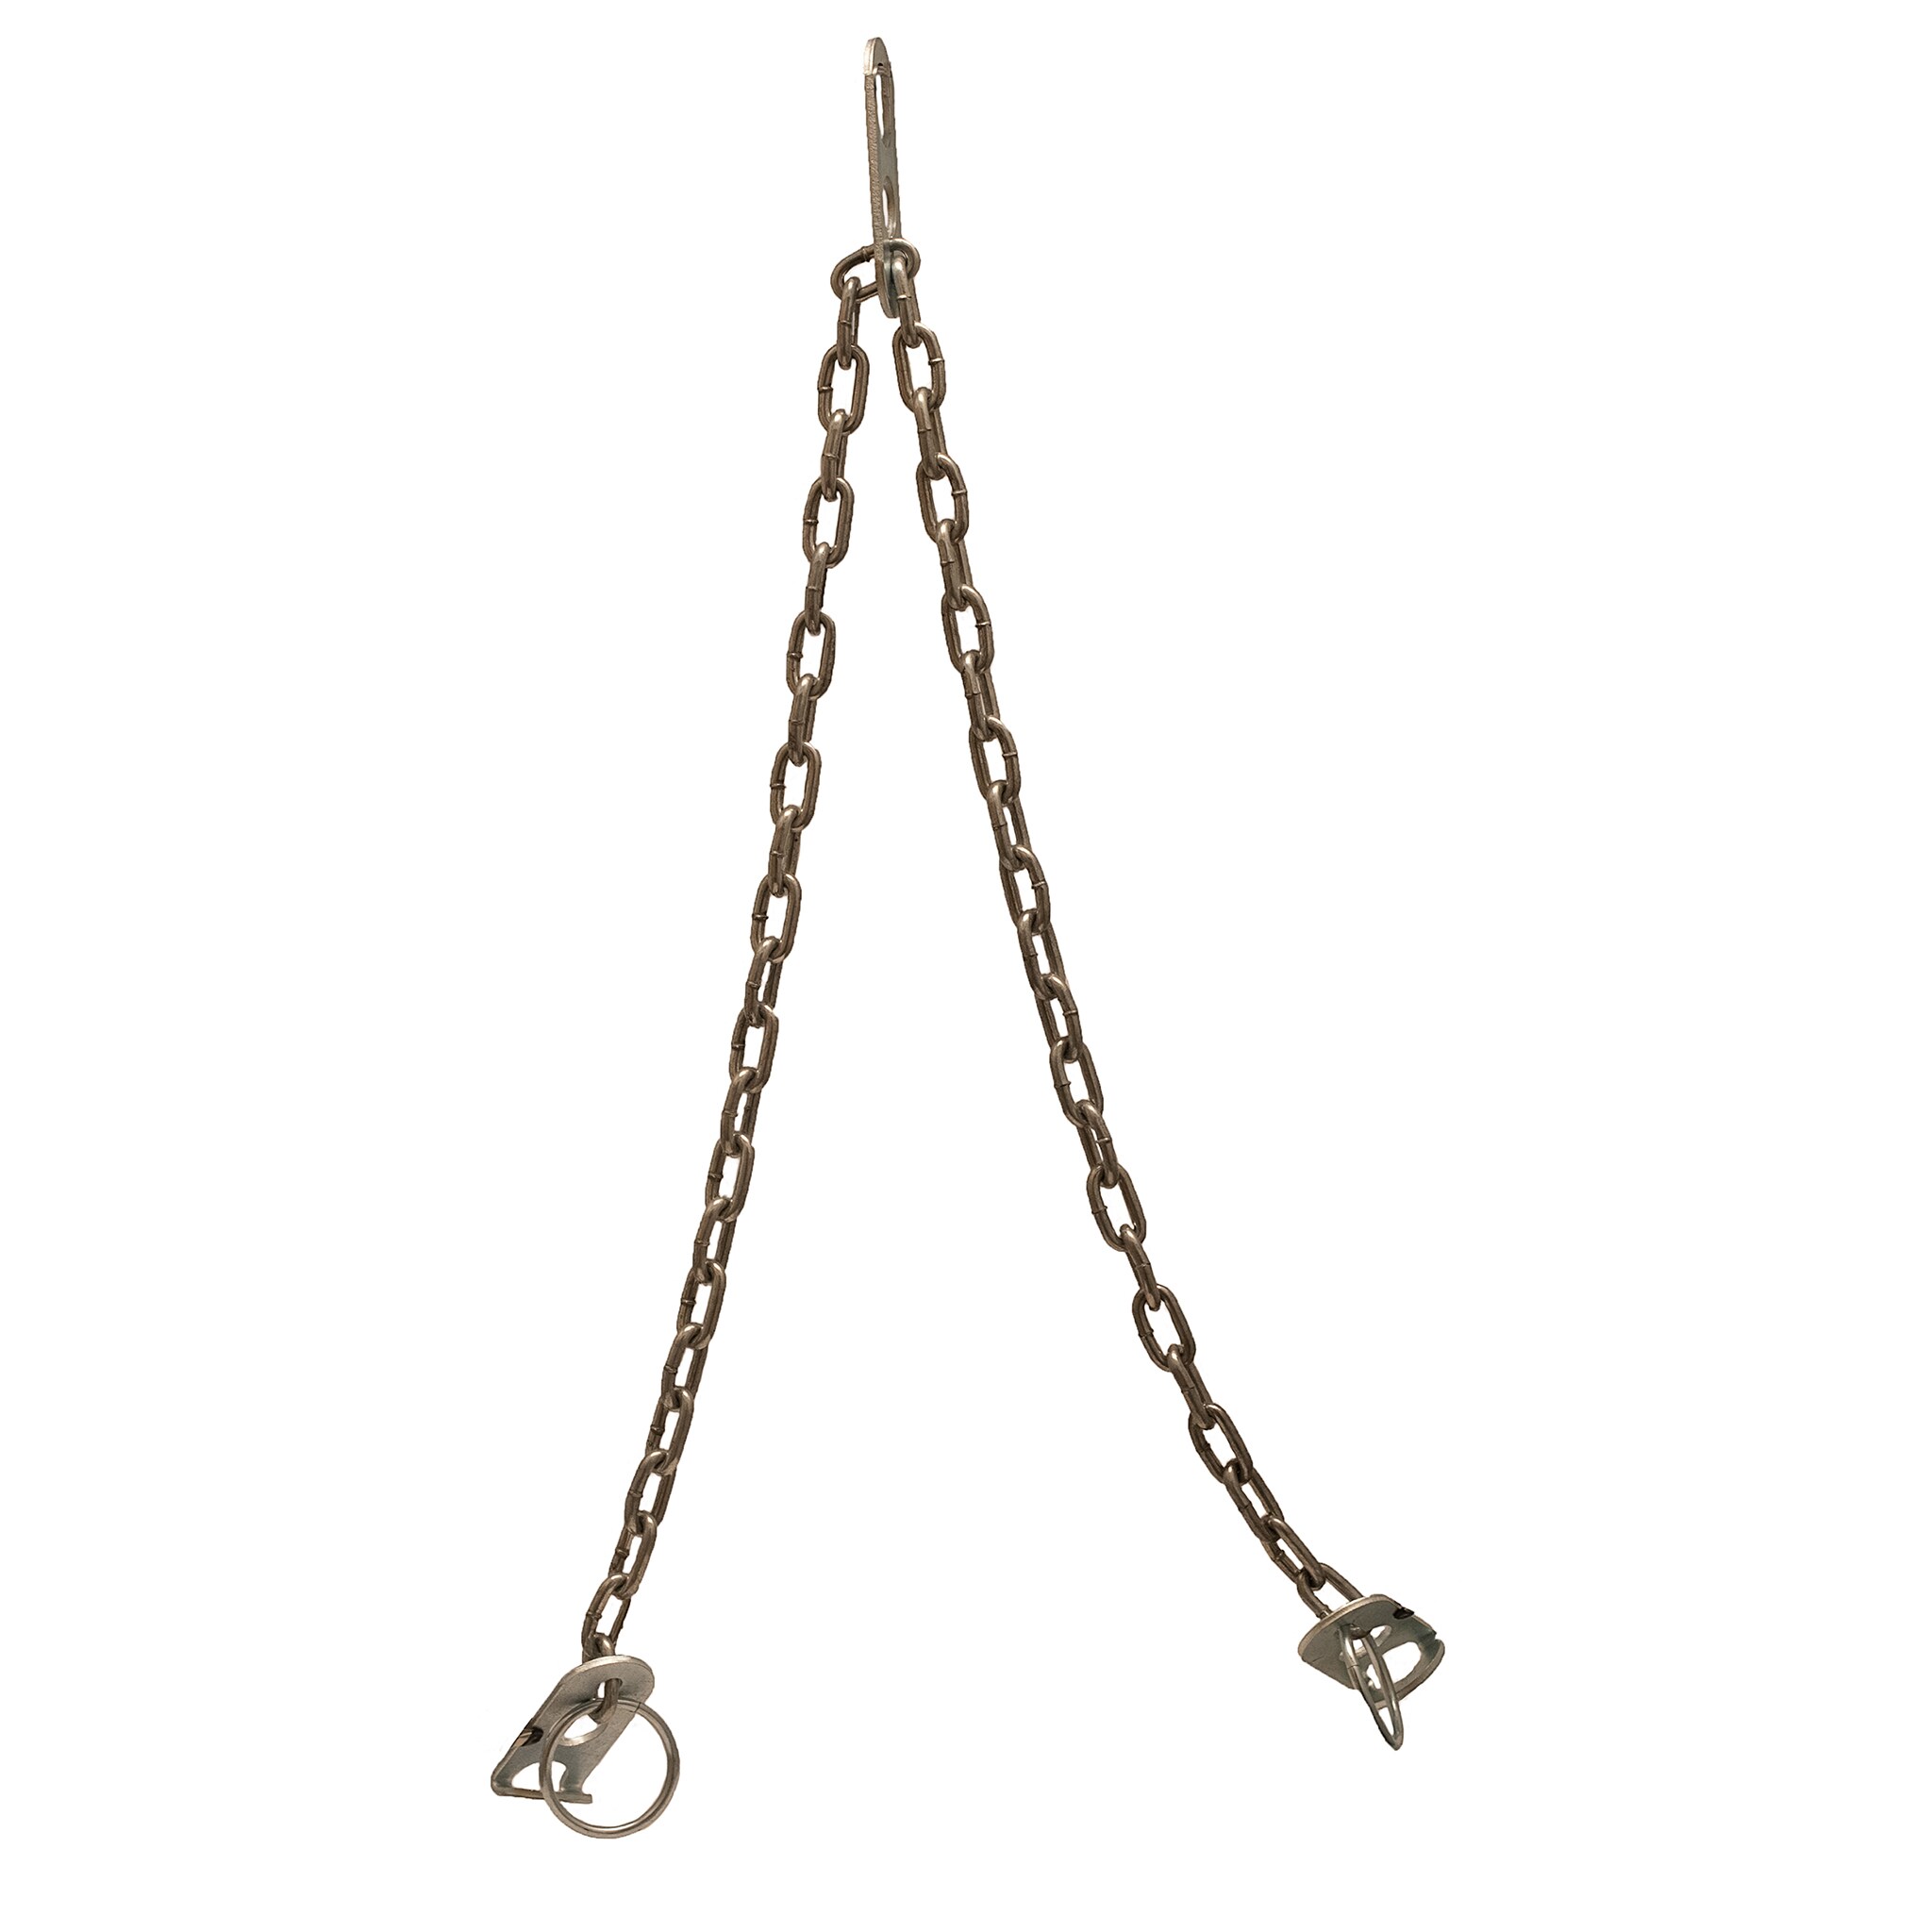 Chain Link Fence Fabric Pull Chain Stretcher Tool (1000 lbs. Pull Rating) -  Chain Link Fence Tools